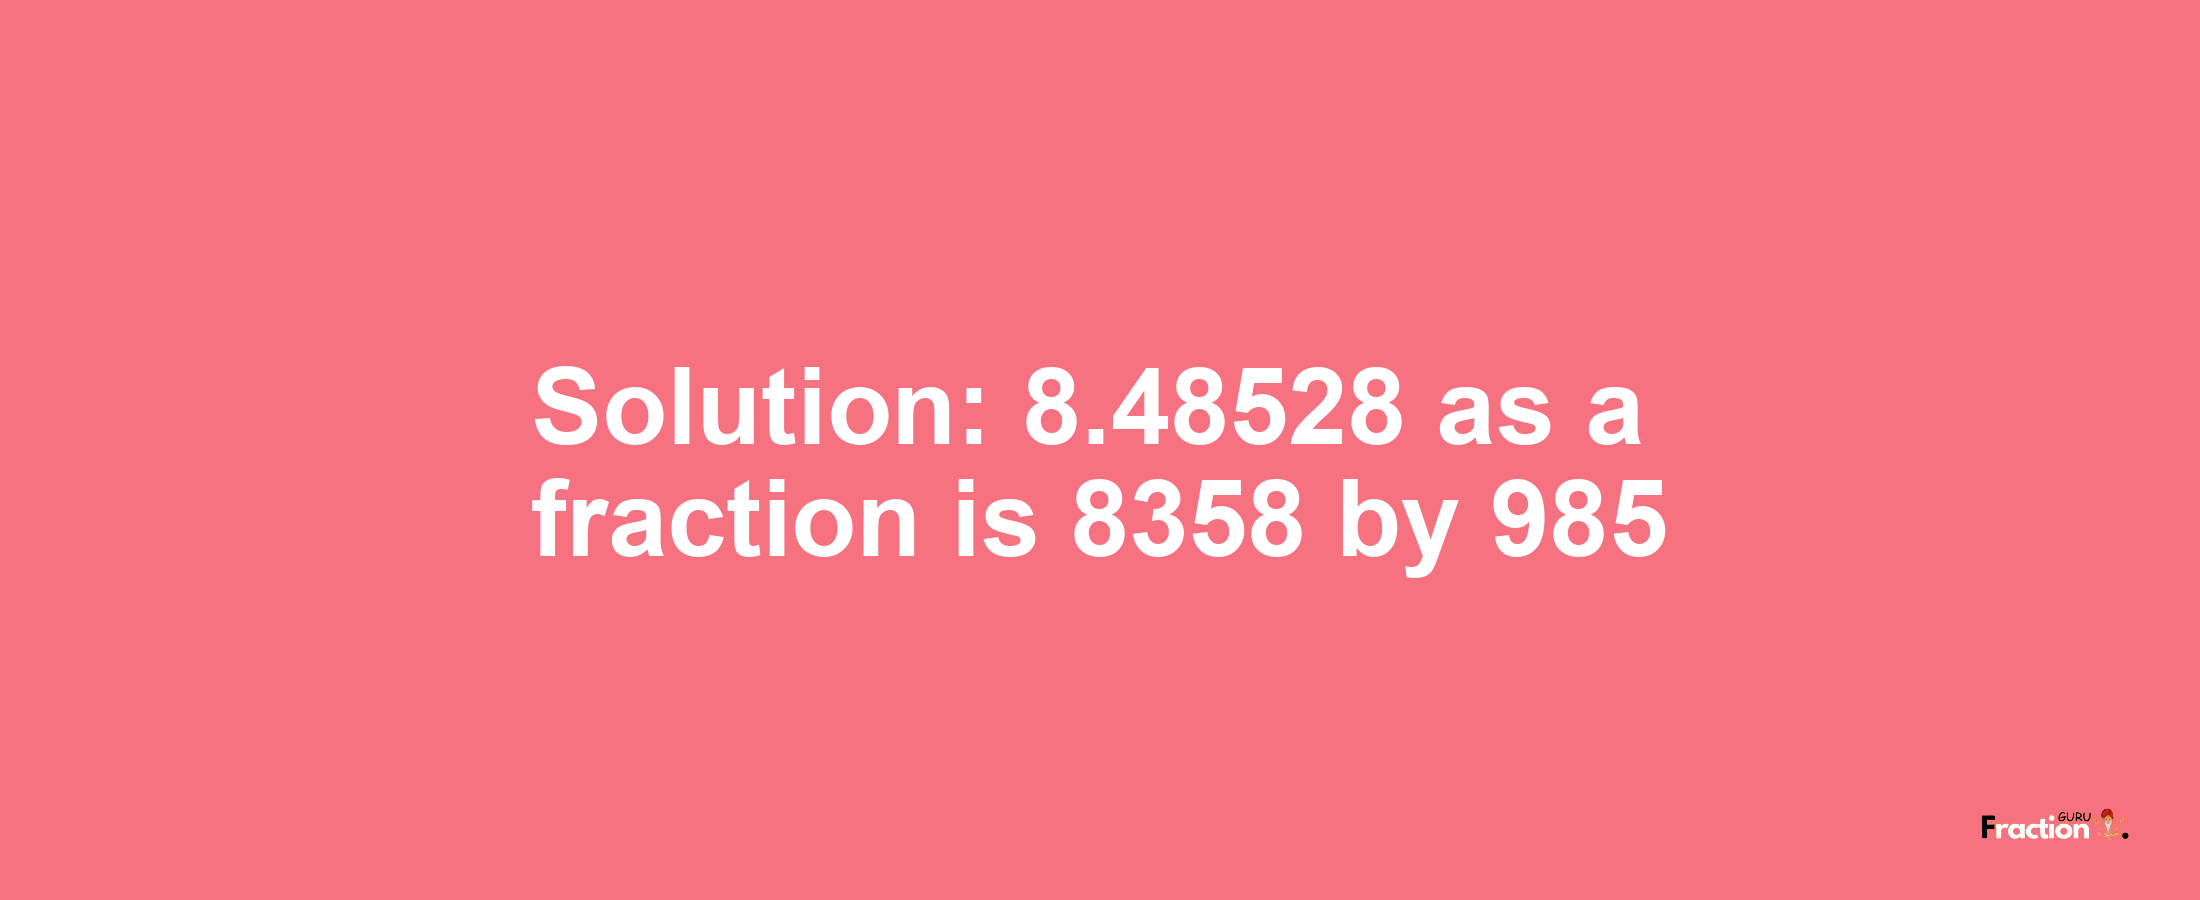 Solution:8.48528 as a fraction is 8358/985